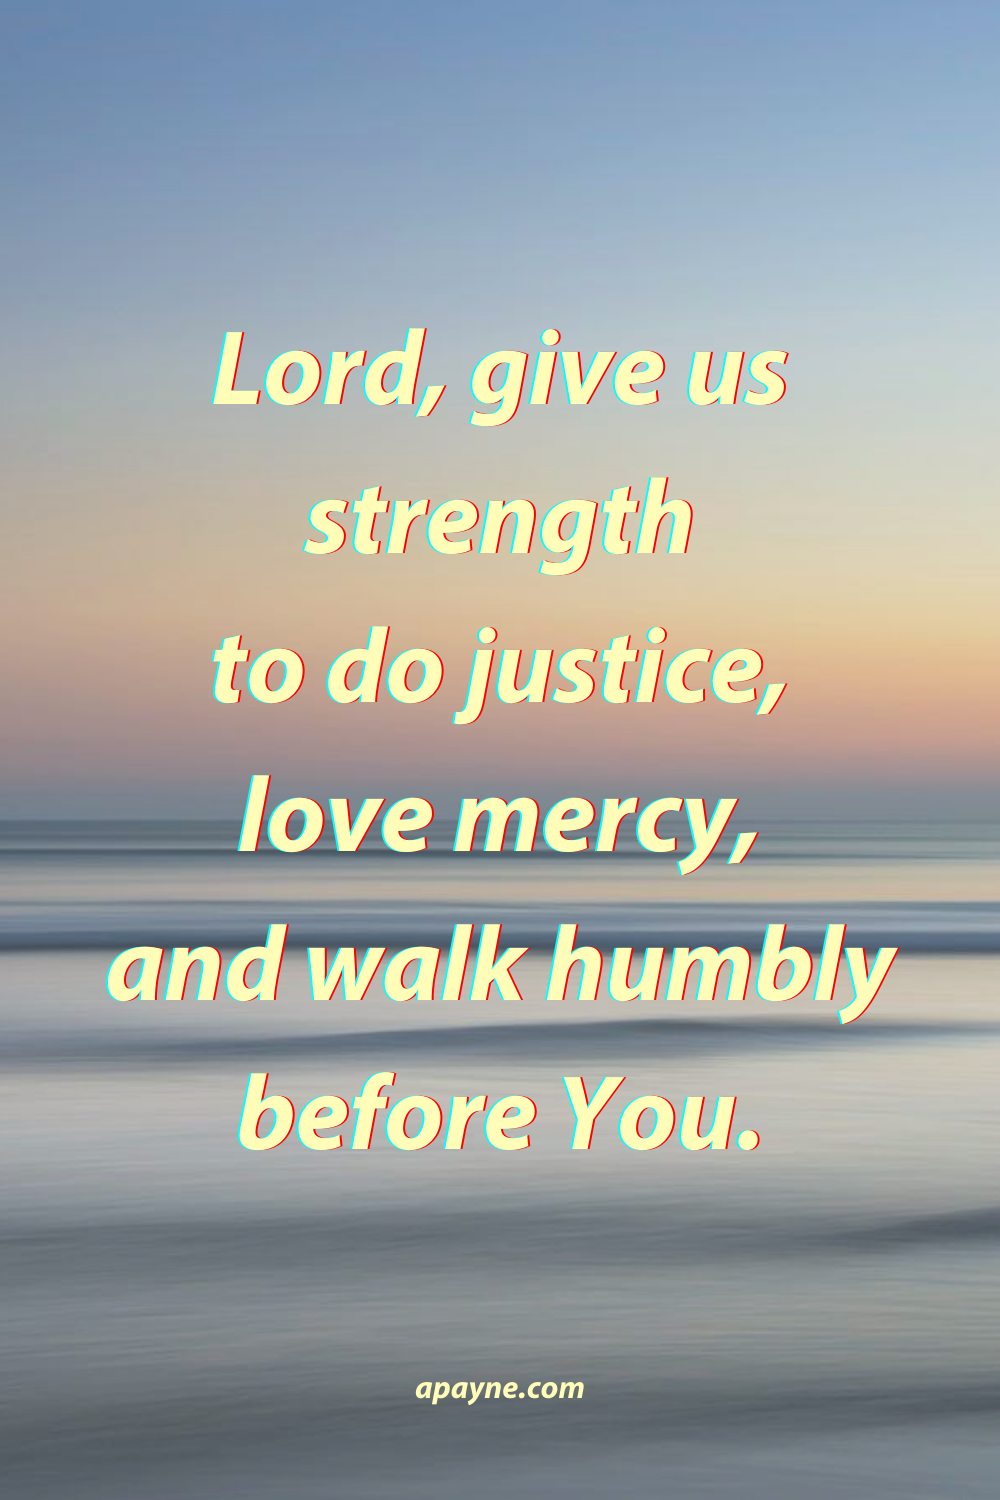 Lord, give us strength to do justice, love mercy, and walk humbly